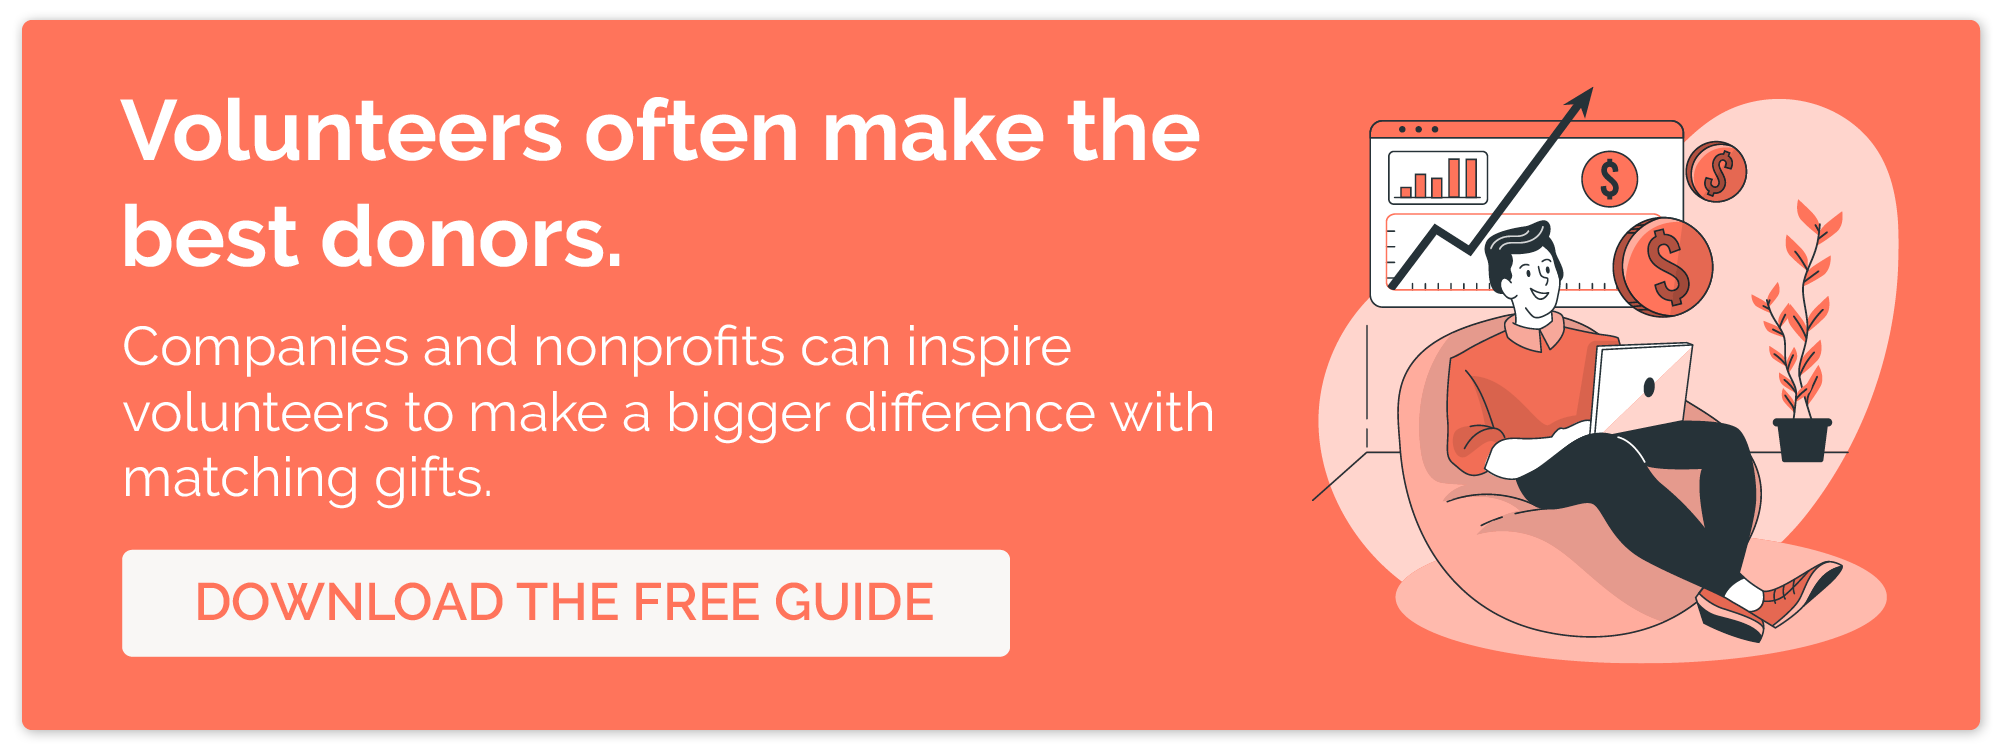 Click here to download a guide for matching gifts, a great way to encourage skilled volunteers to also donate to nonprofits.